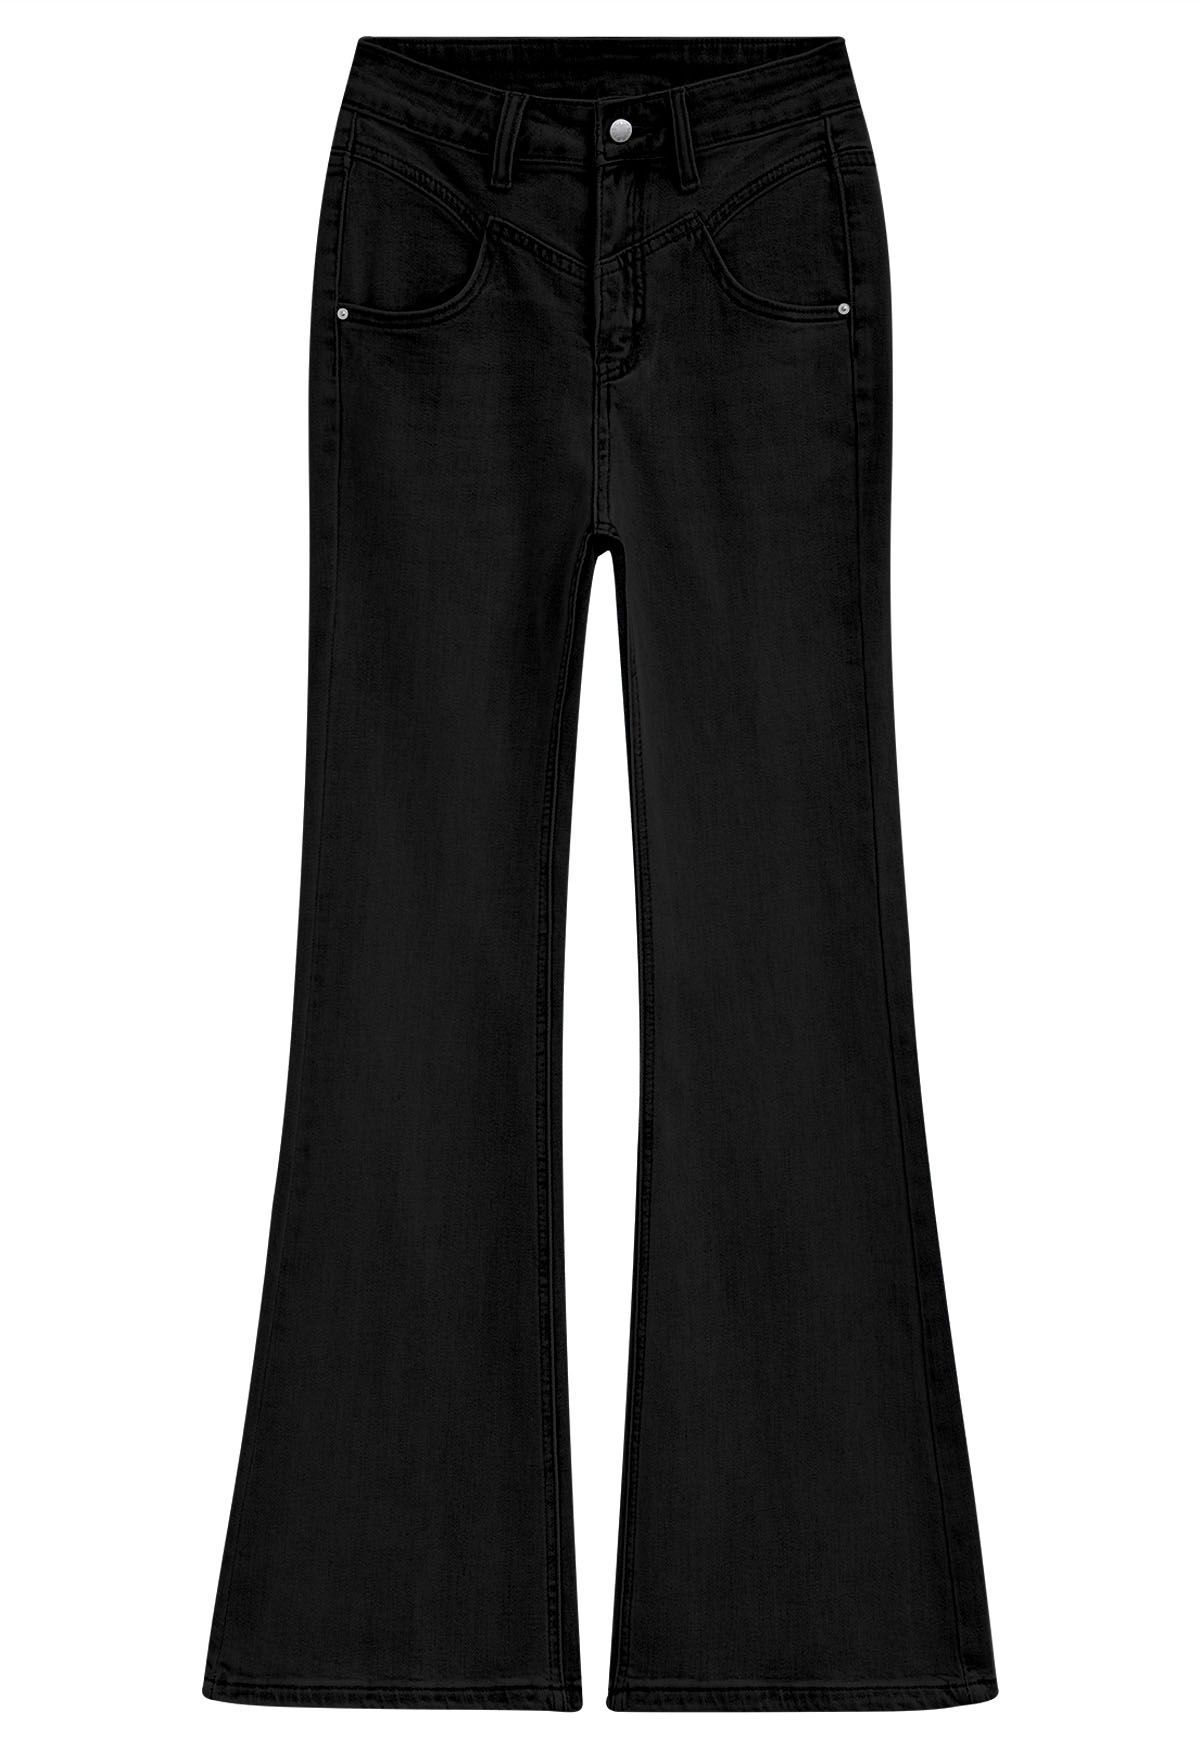 Flattering Stretchy Flare Leg Jeans in Black | Chicwish